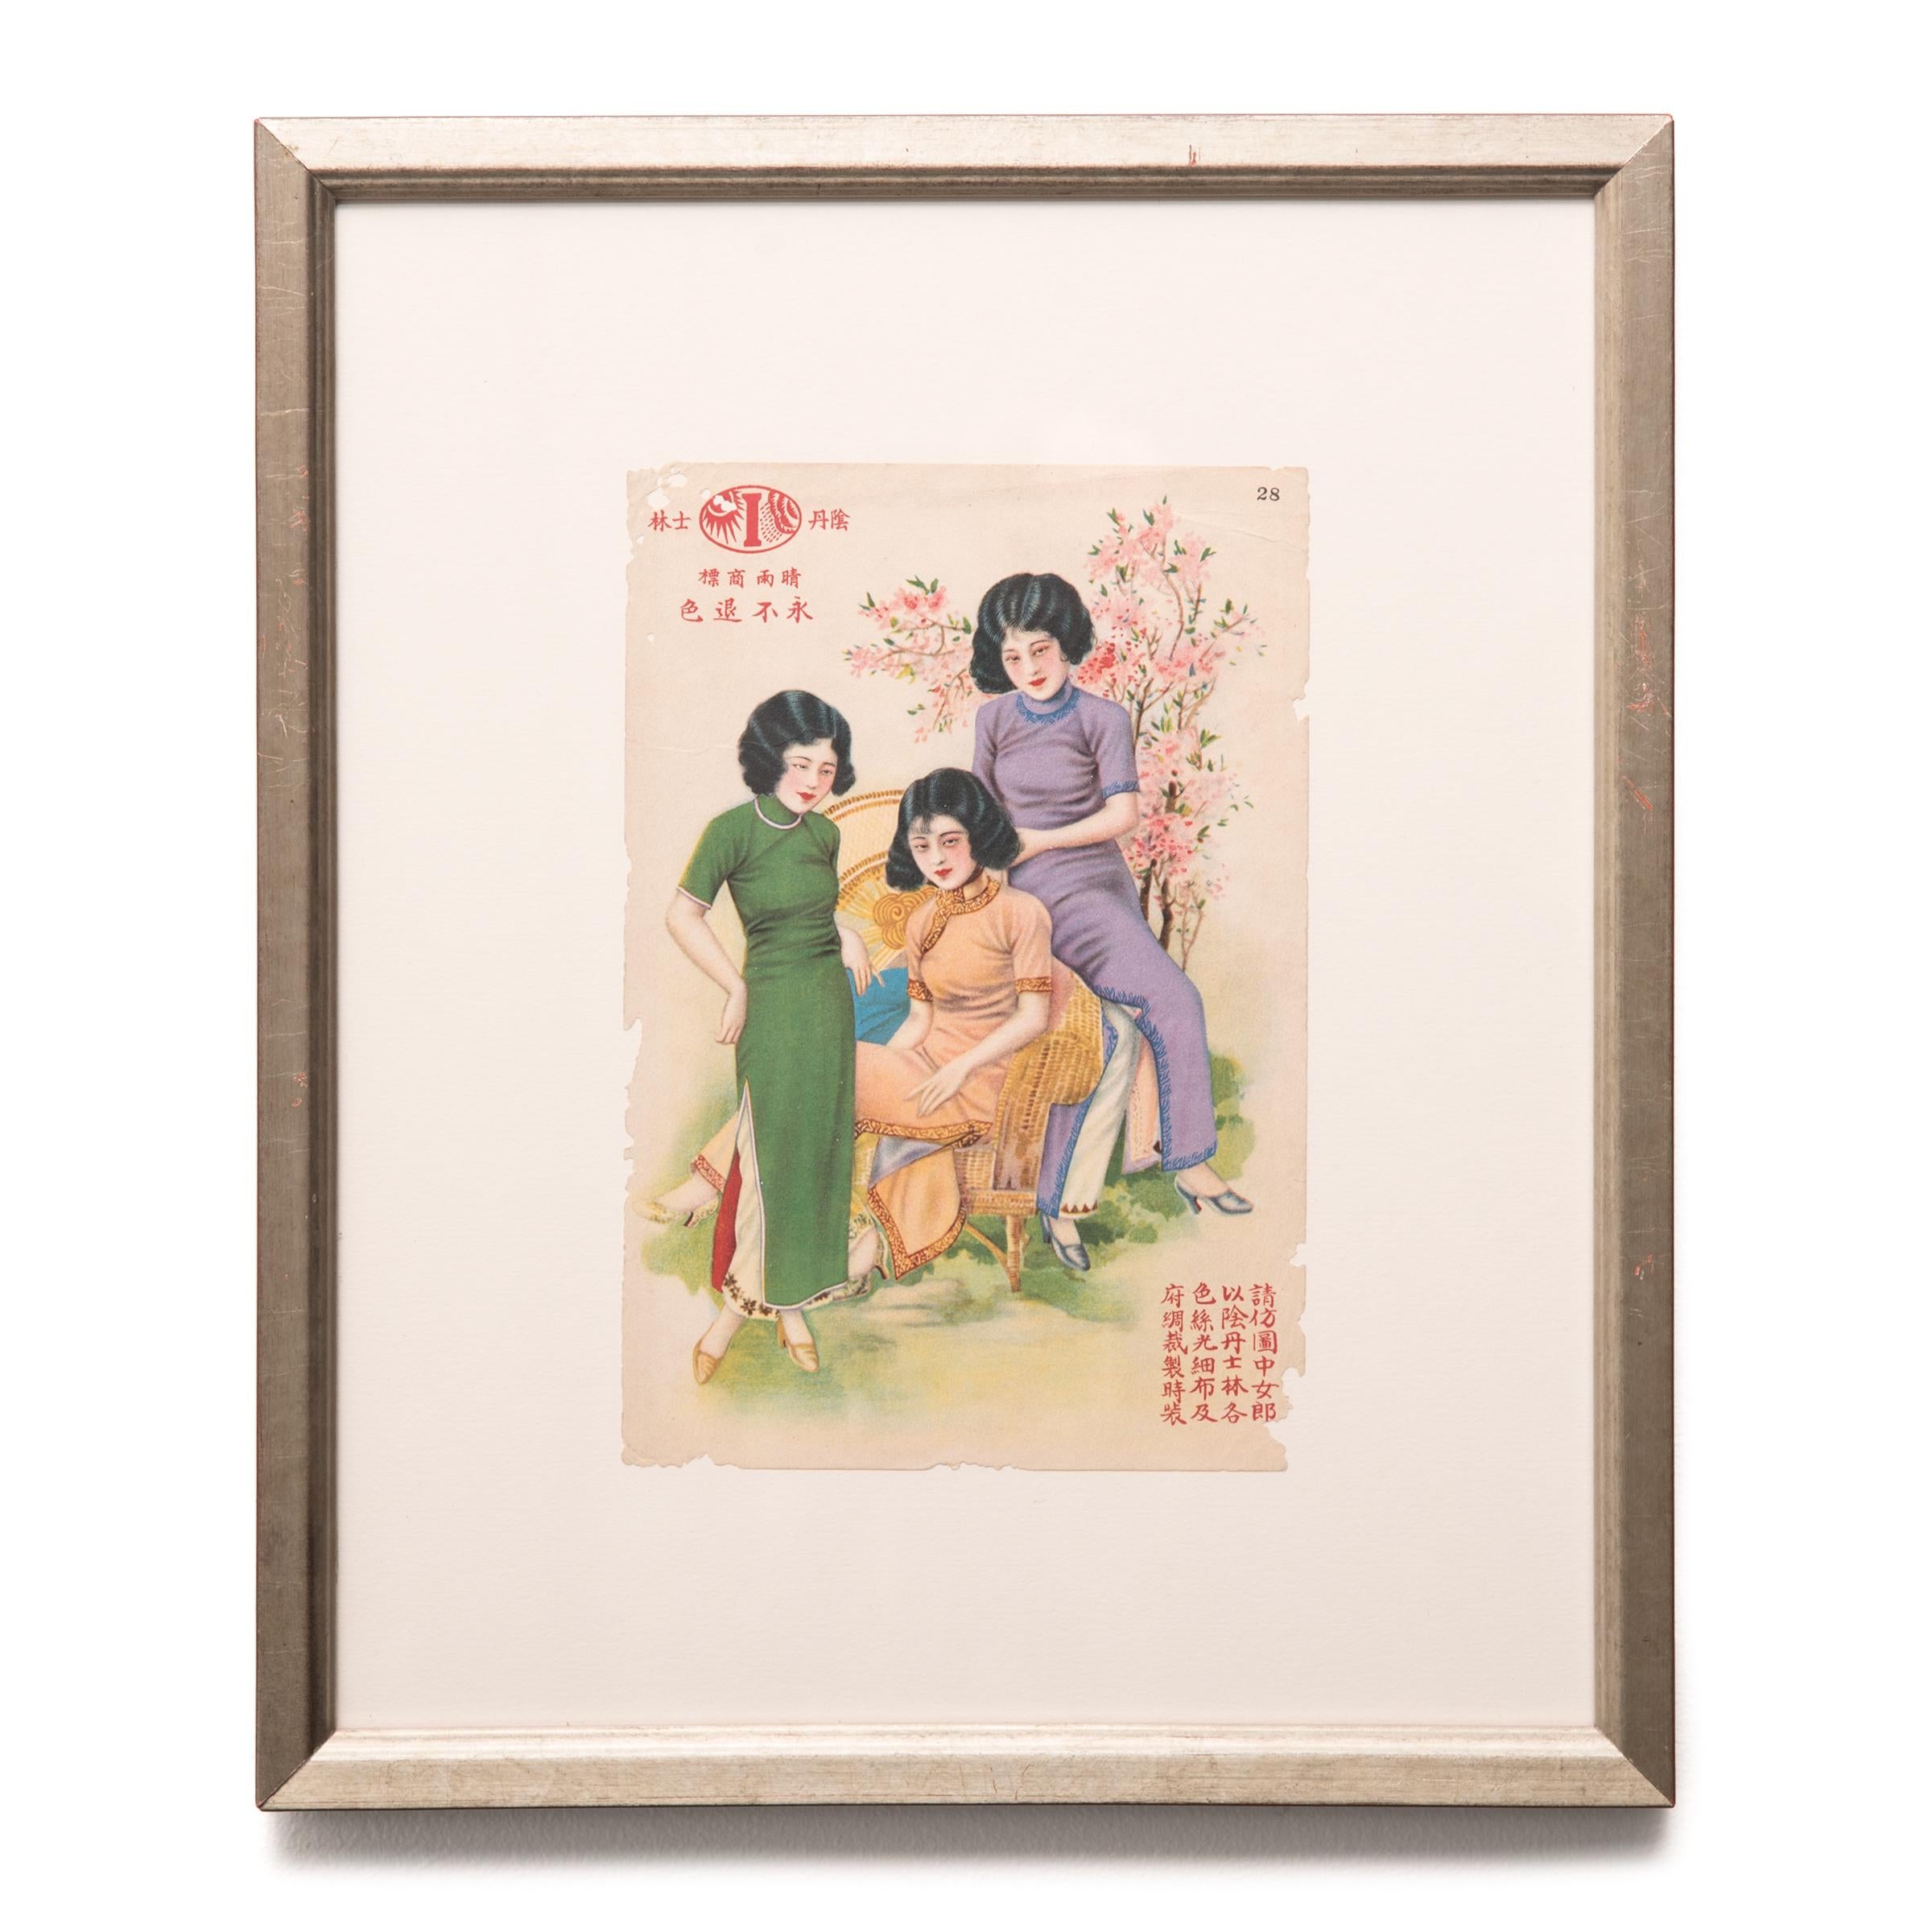 Three Starlets, Vintage Chinese Republic Period Advertisement - Print by Unknown